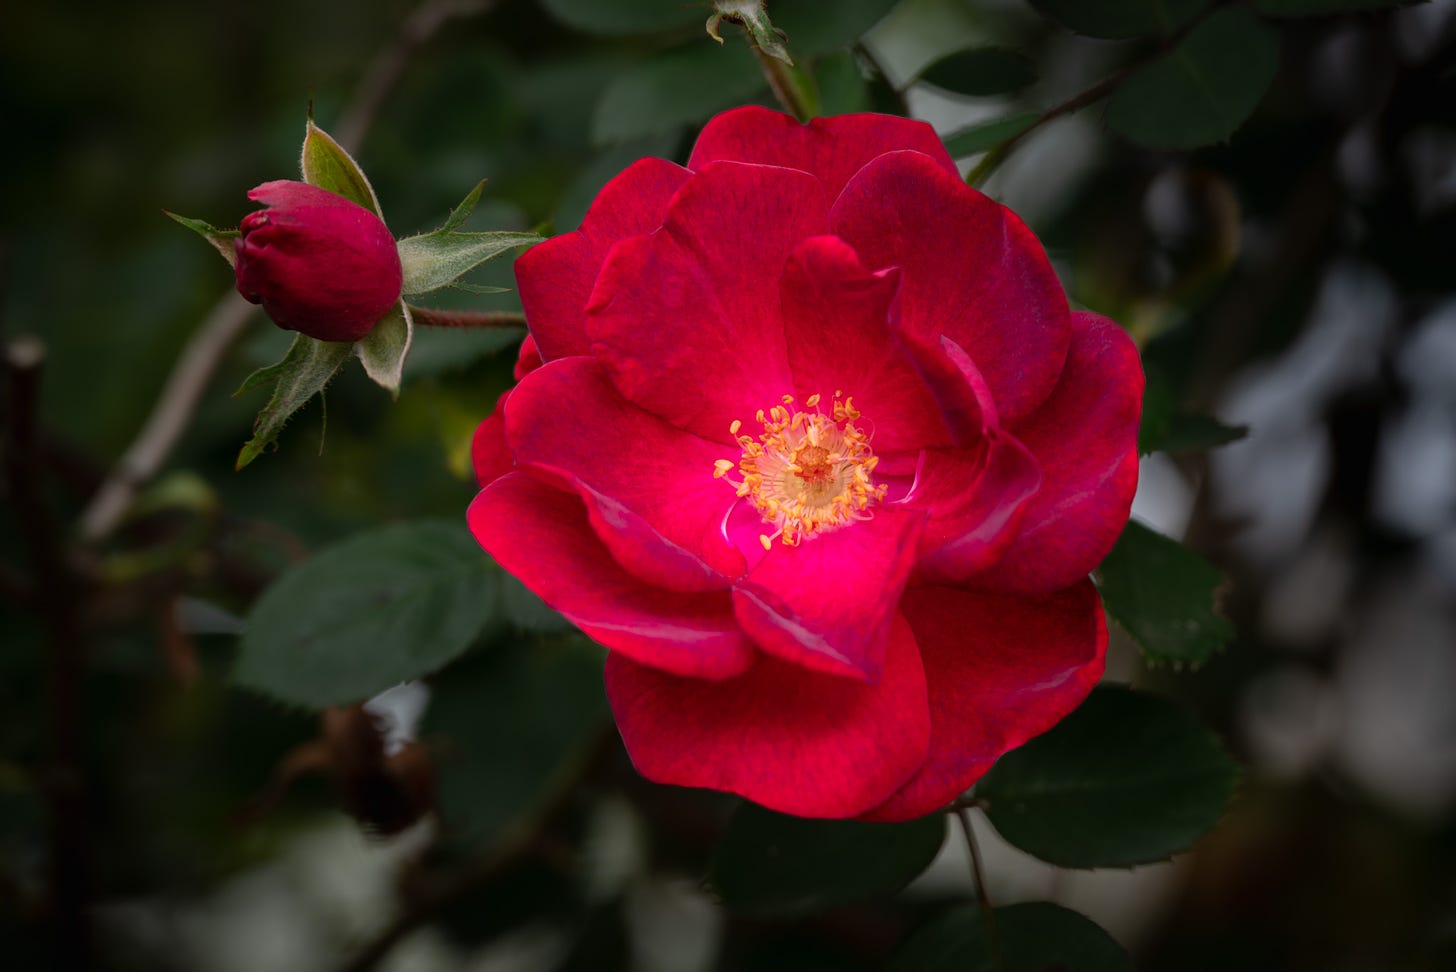 A single red rose fuly open with yellow pistals in the center and an unopened bud among the leaves in the background